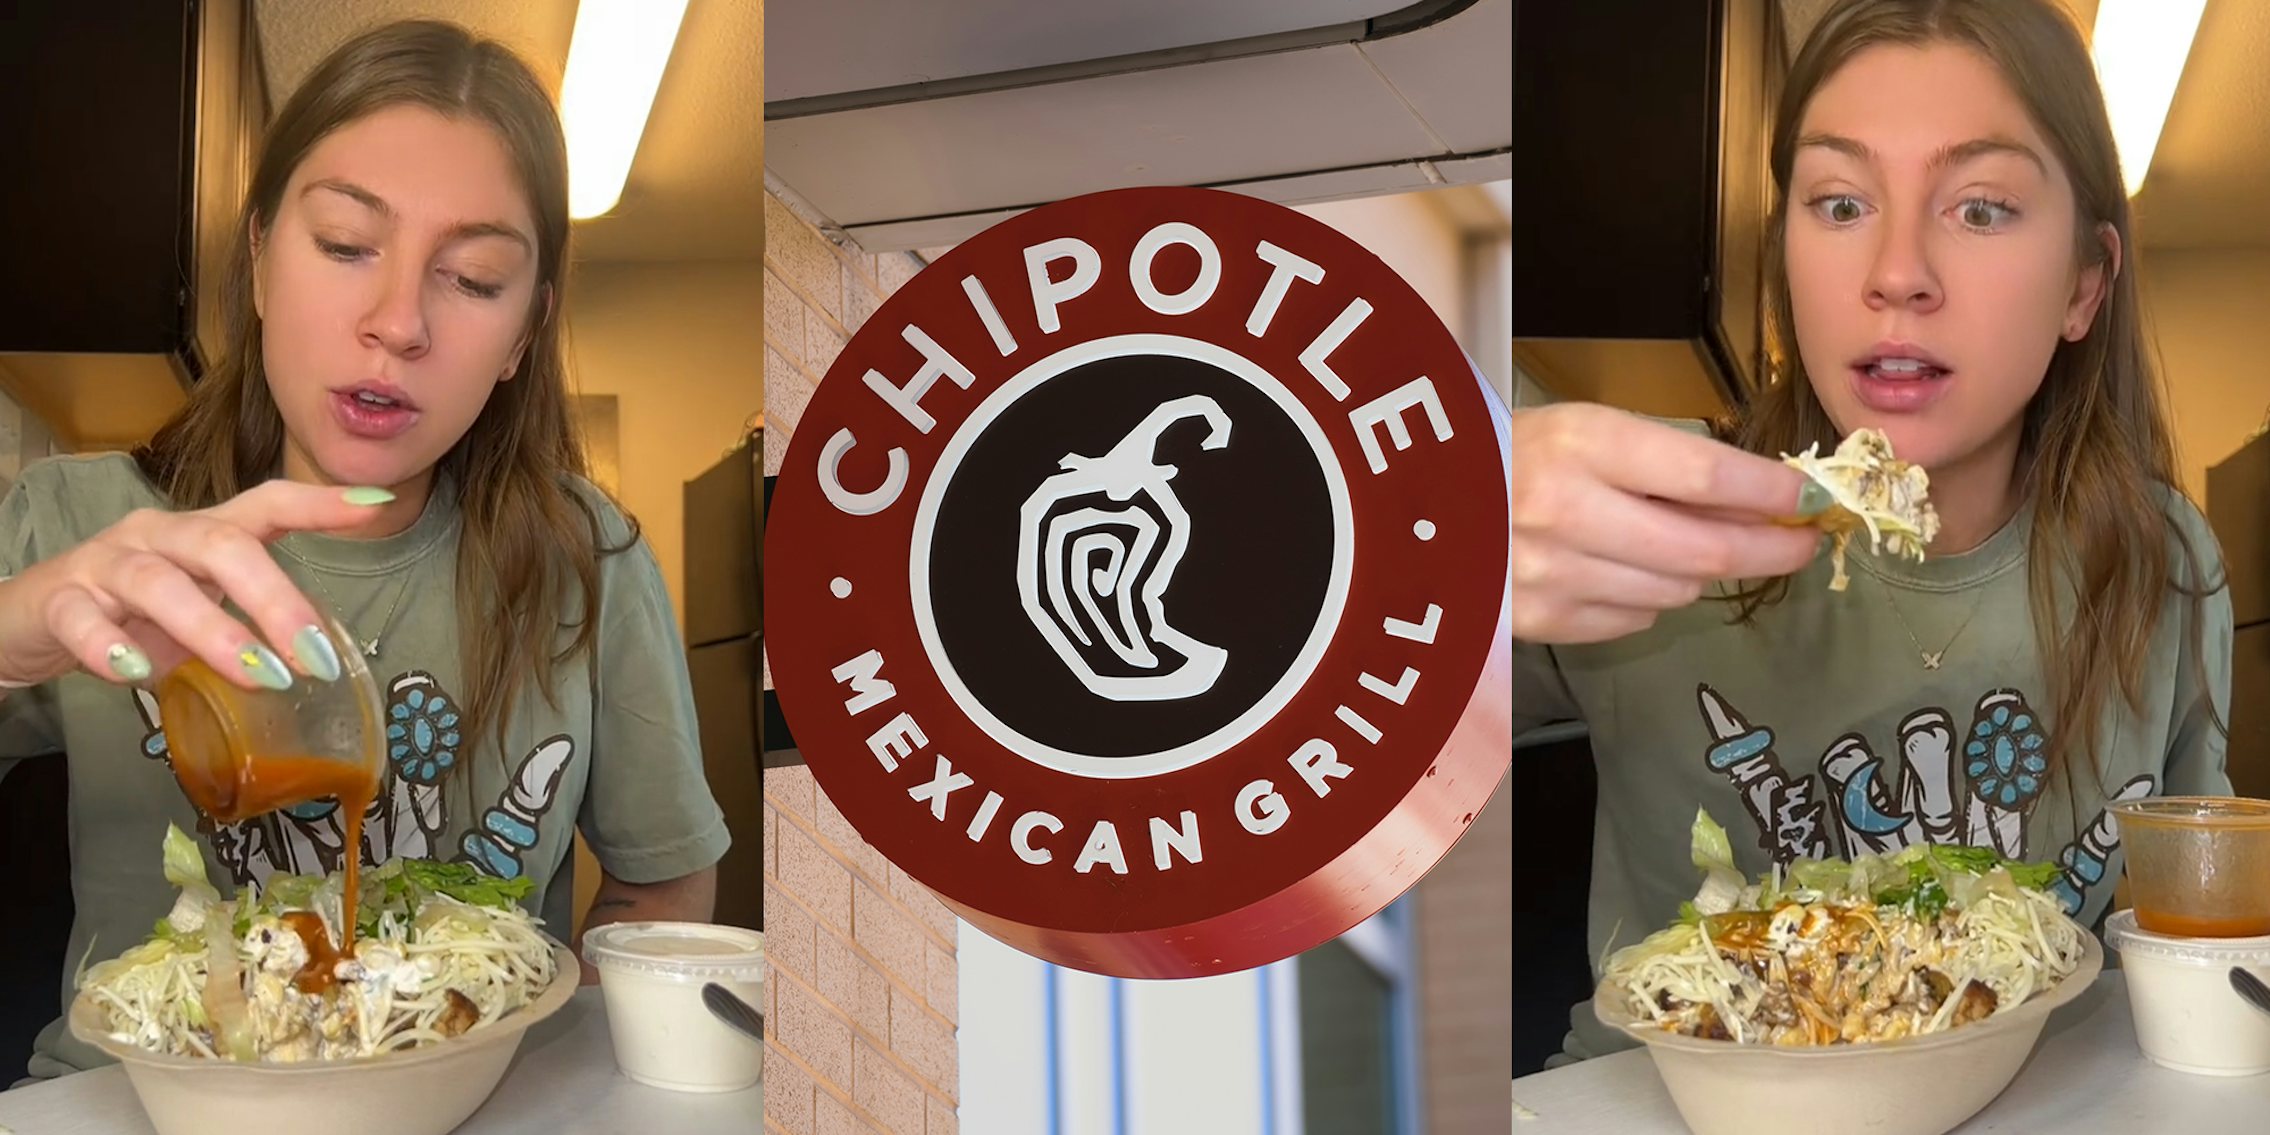 customer claims chipotle morning food is leftovers